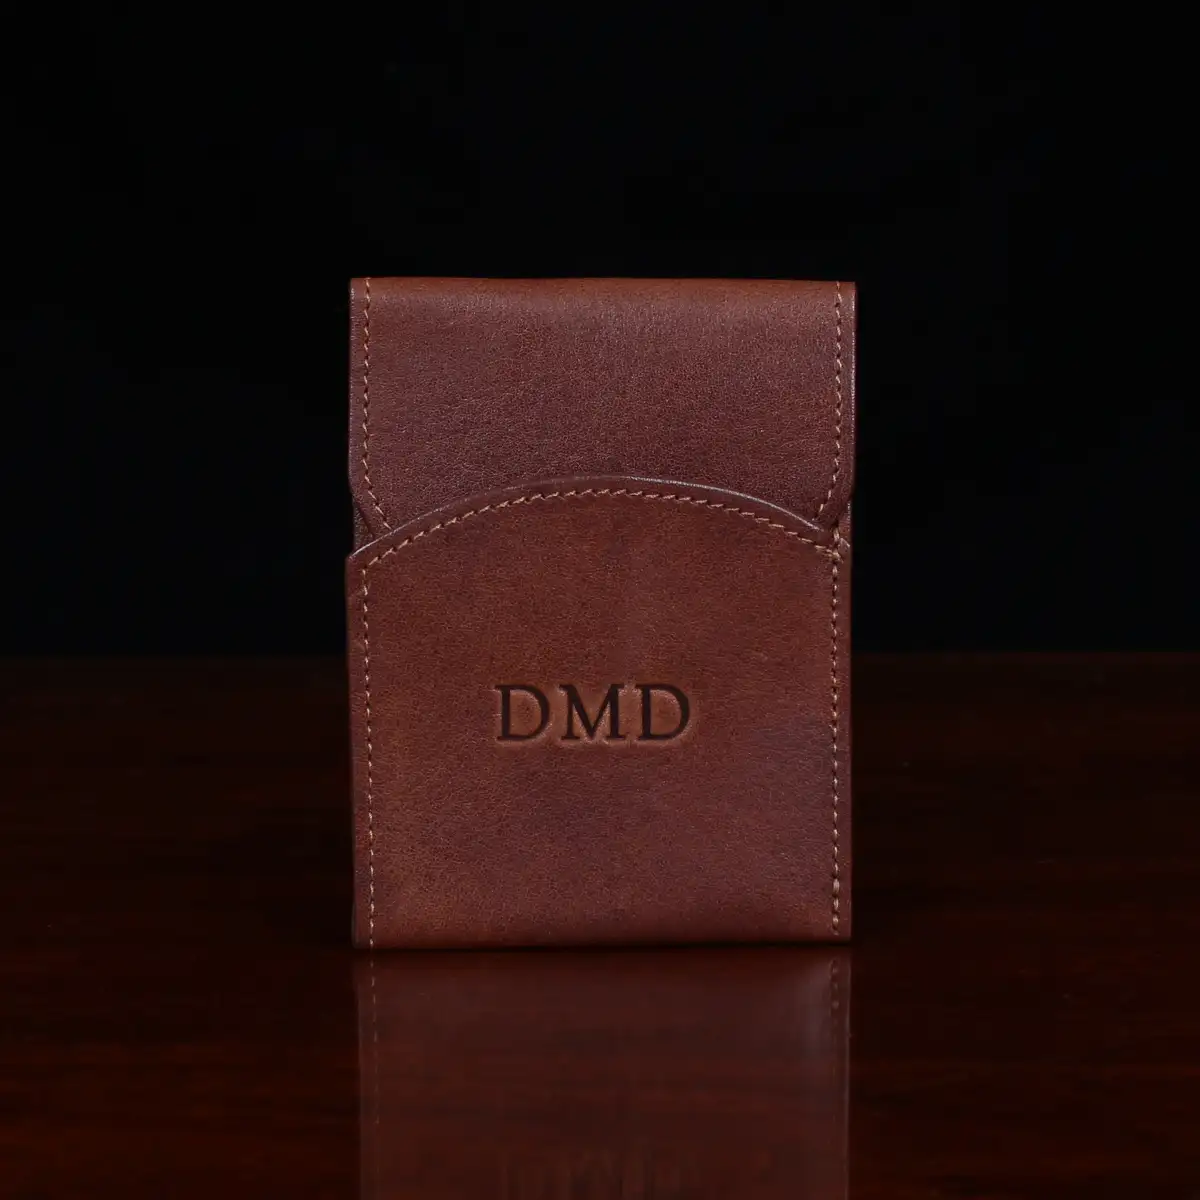 Light brown handmade leather card holder from genuine Italian leather